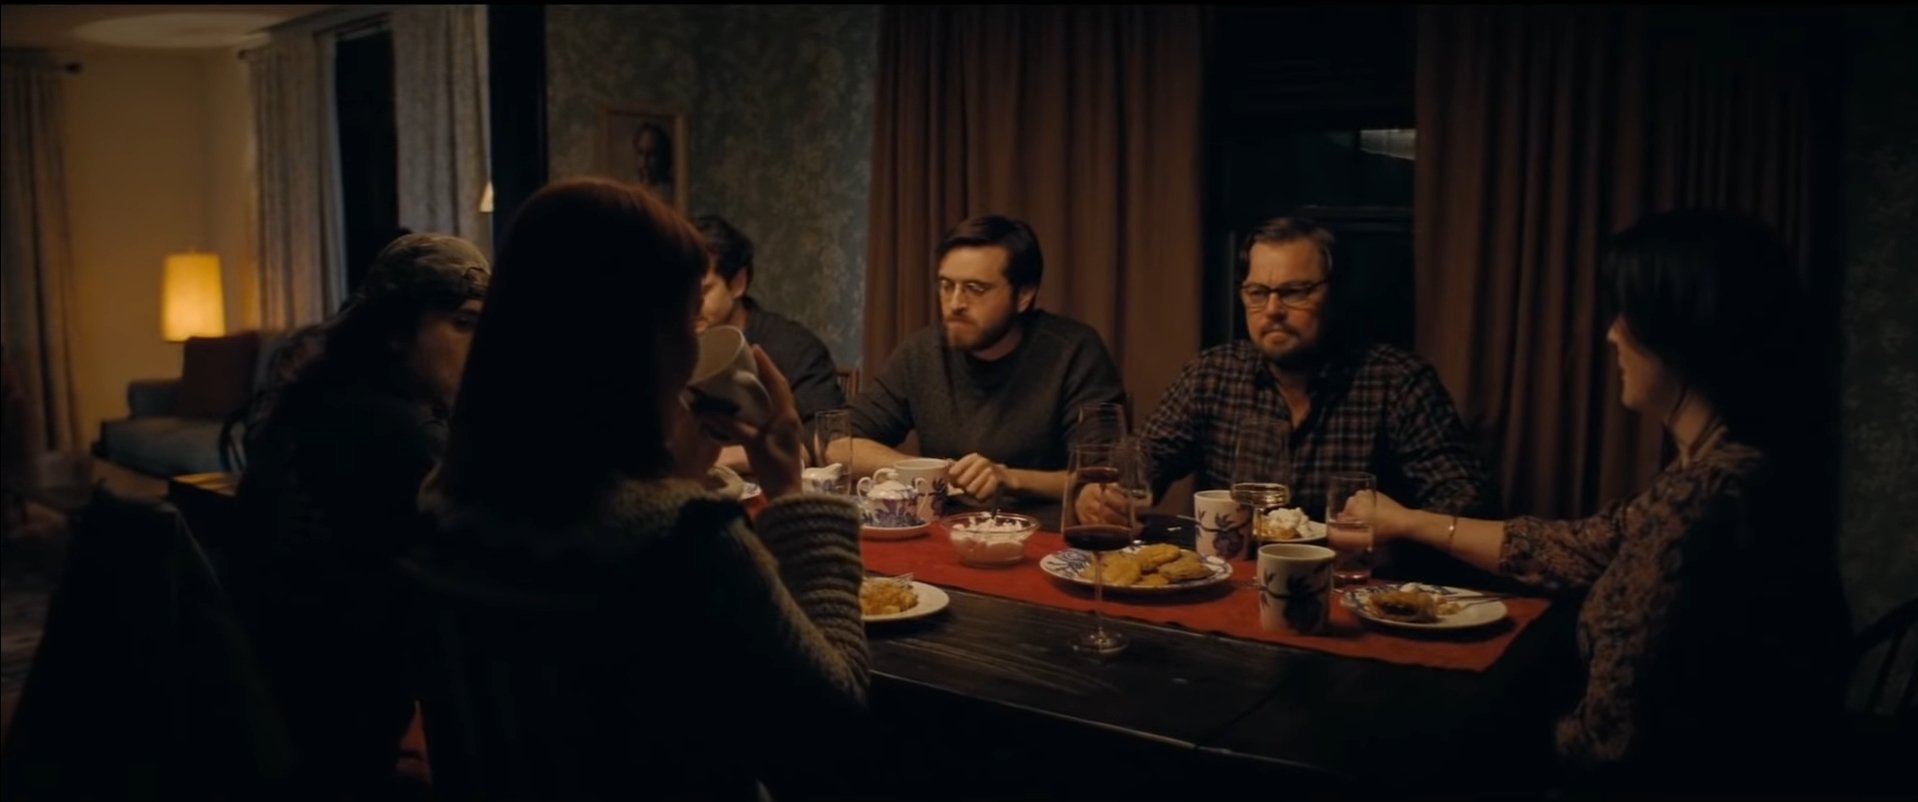 Final scene from the movie Don't Look Up, featuring characters restlessly eating dinner.